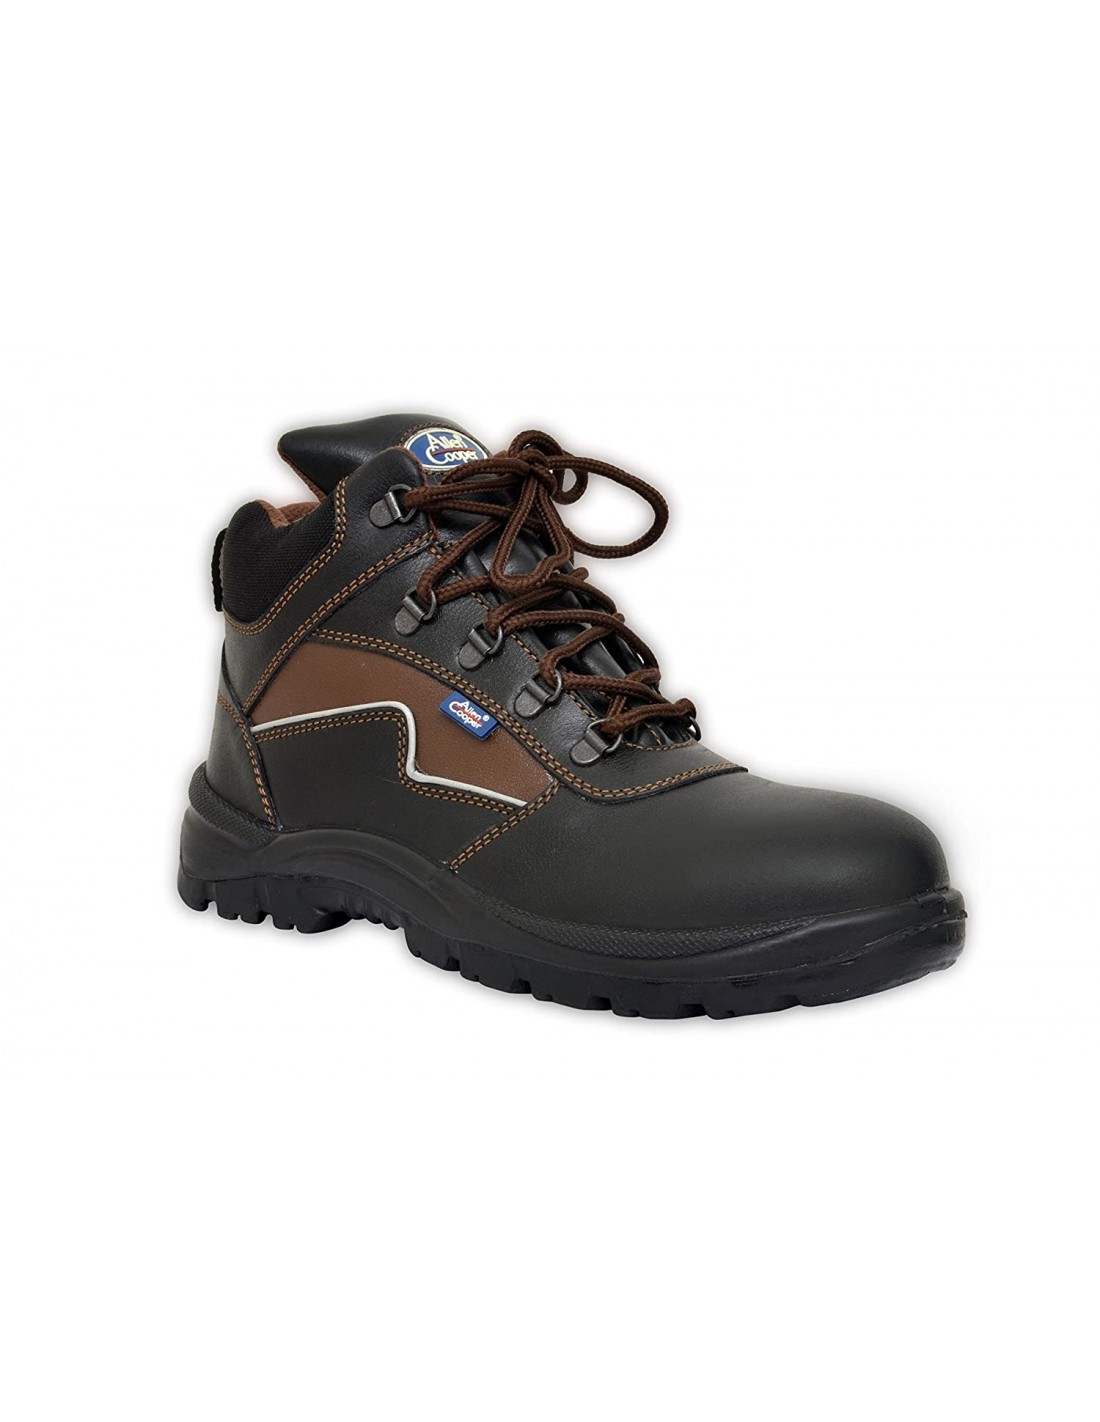 Allen Cooper AC 1170, Hi-Ankle Safety Shoe, ISI Marked For IS:15298 ...